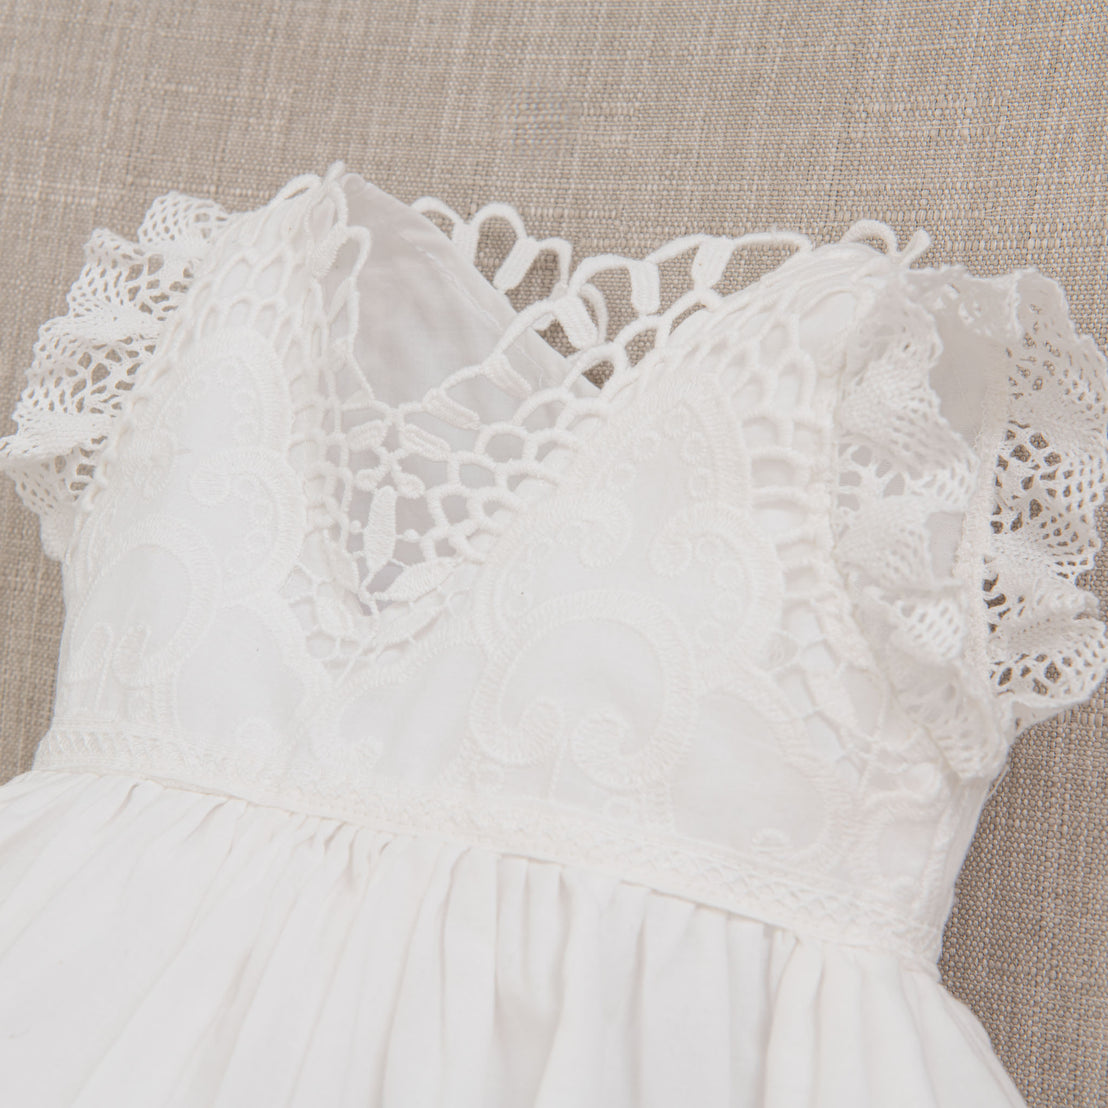 Top detail of the bodice on the Lily Christening gown